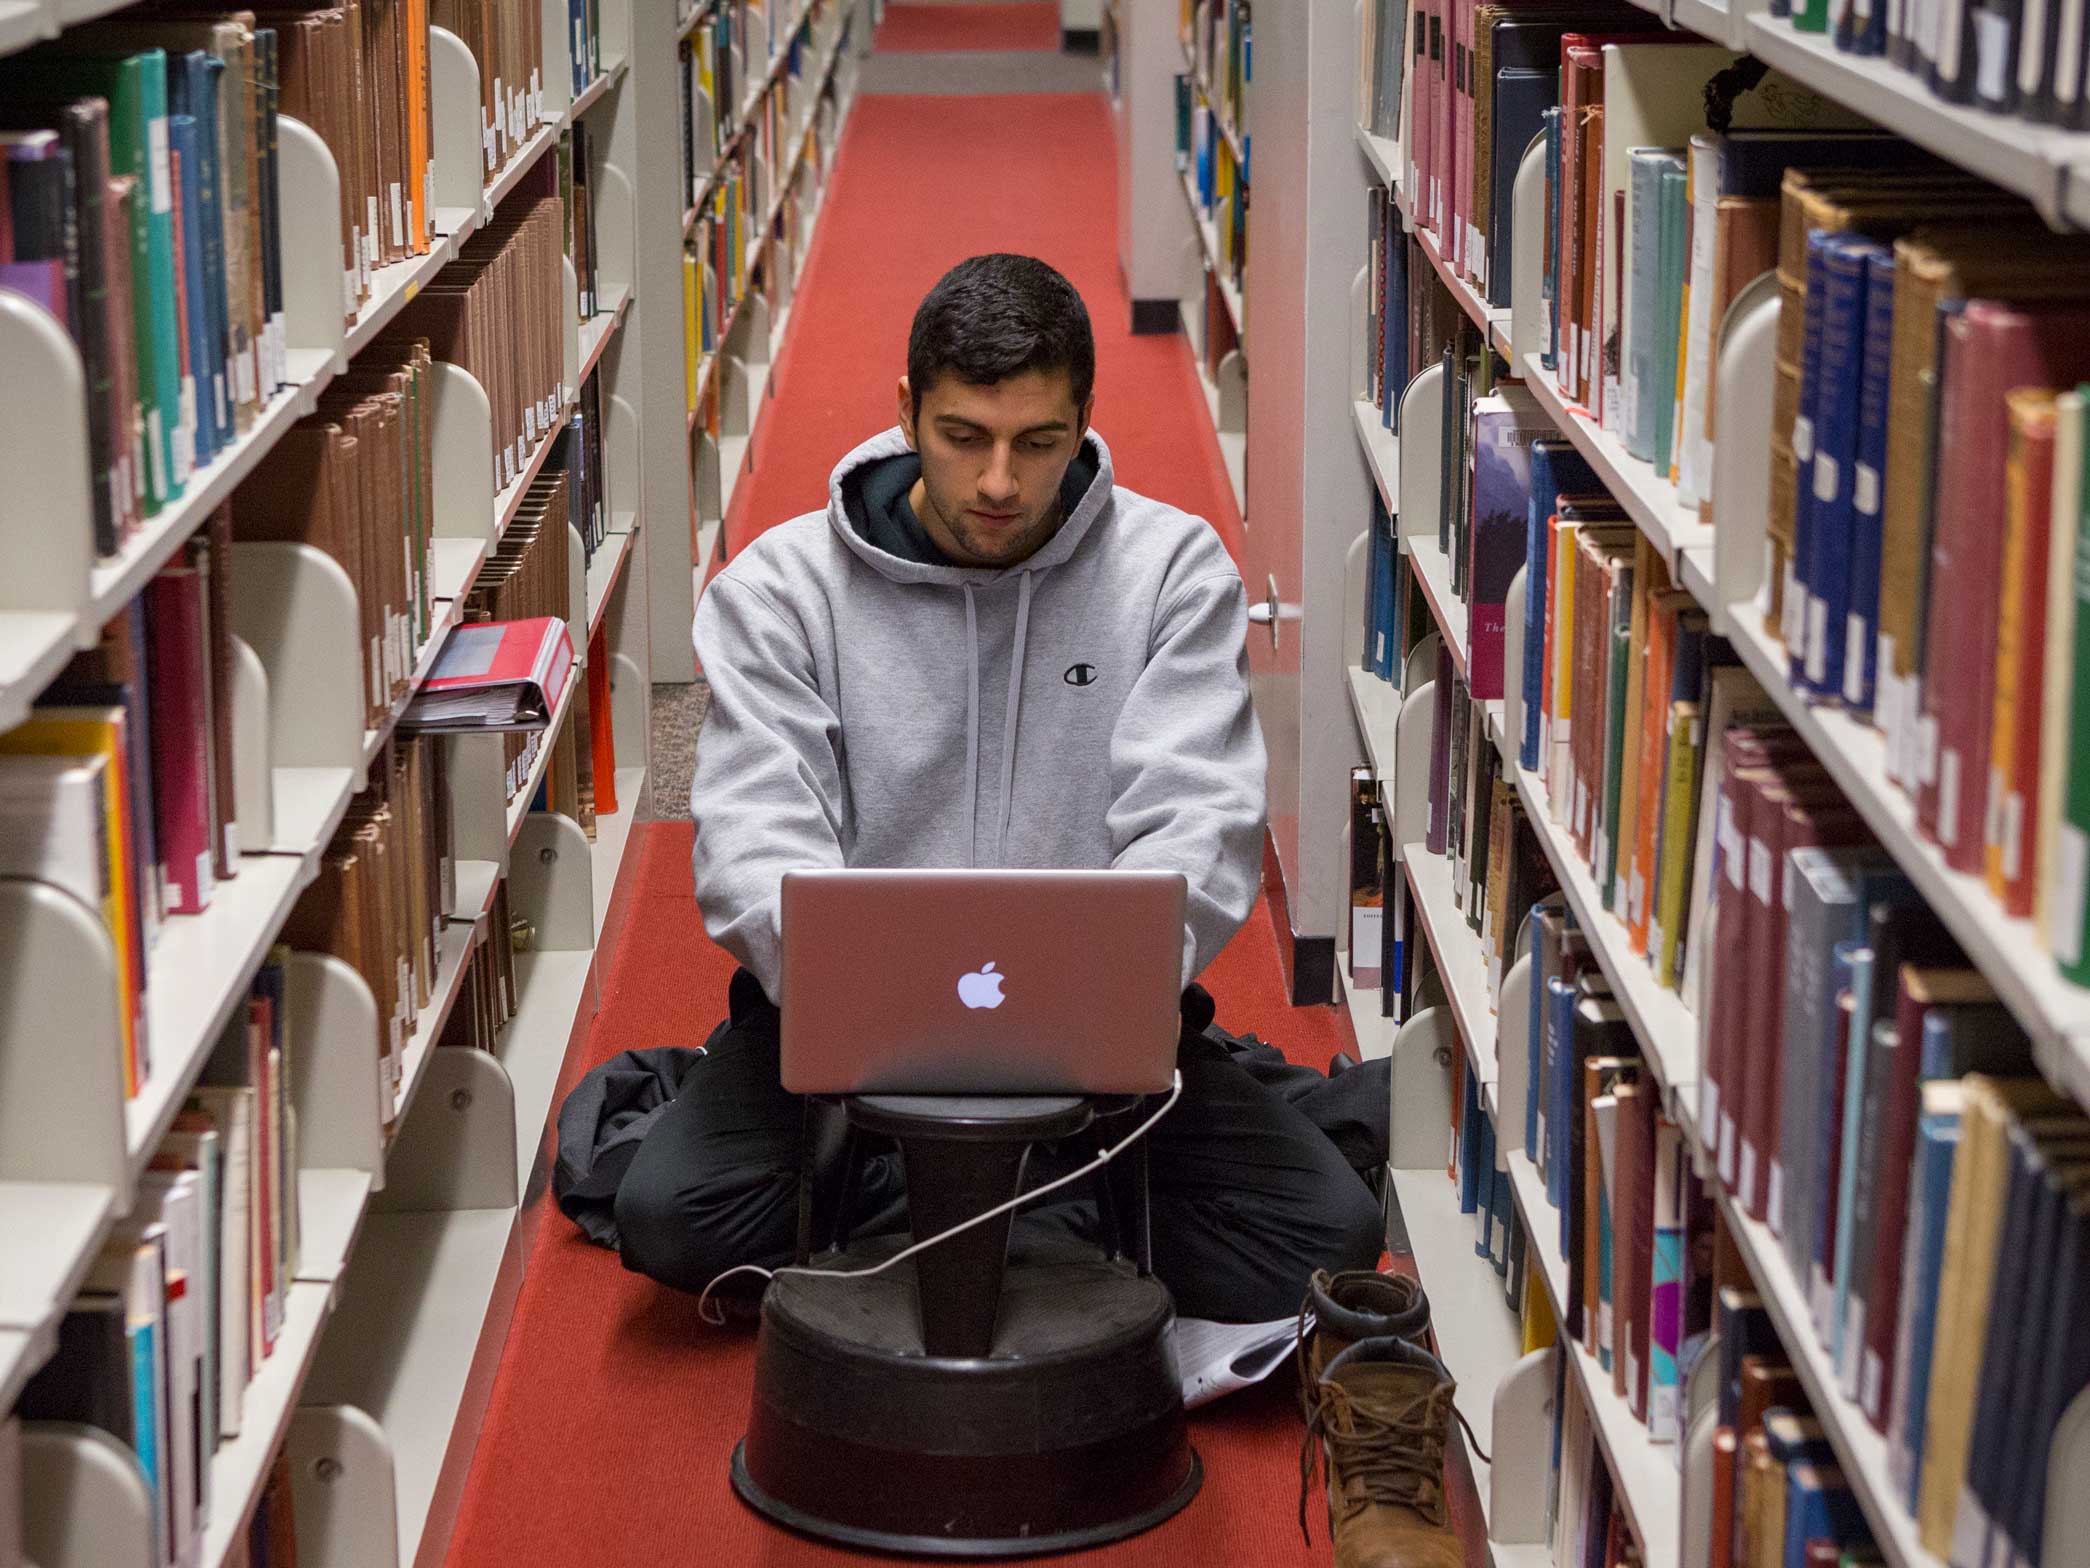 Student using a computer in library stacks photo